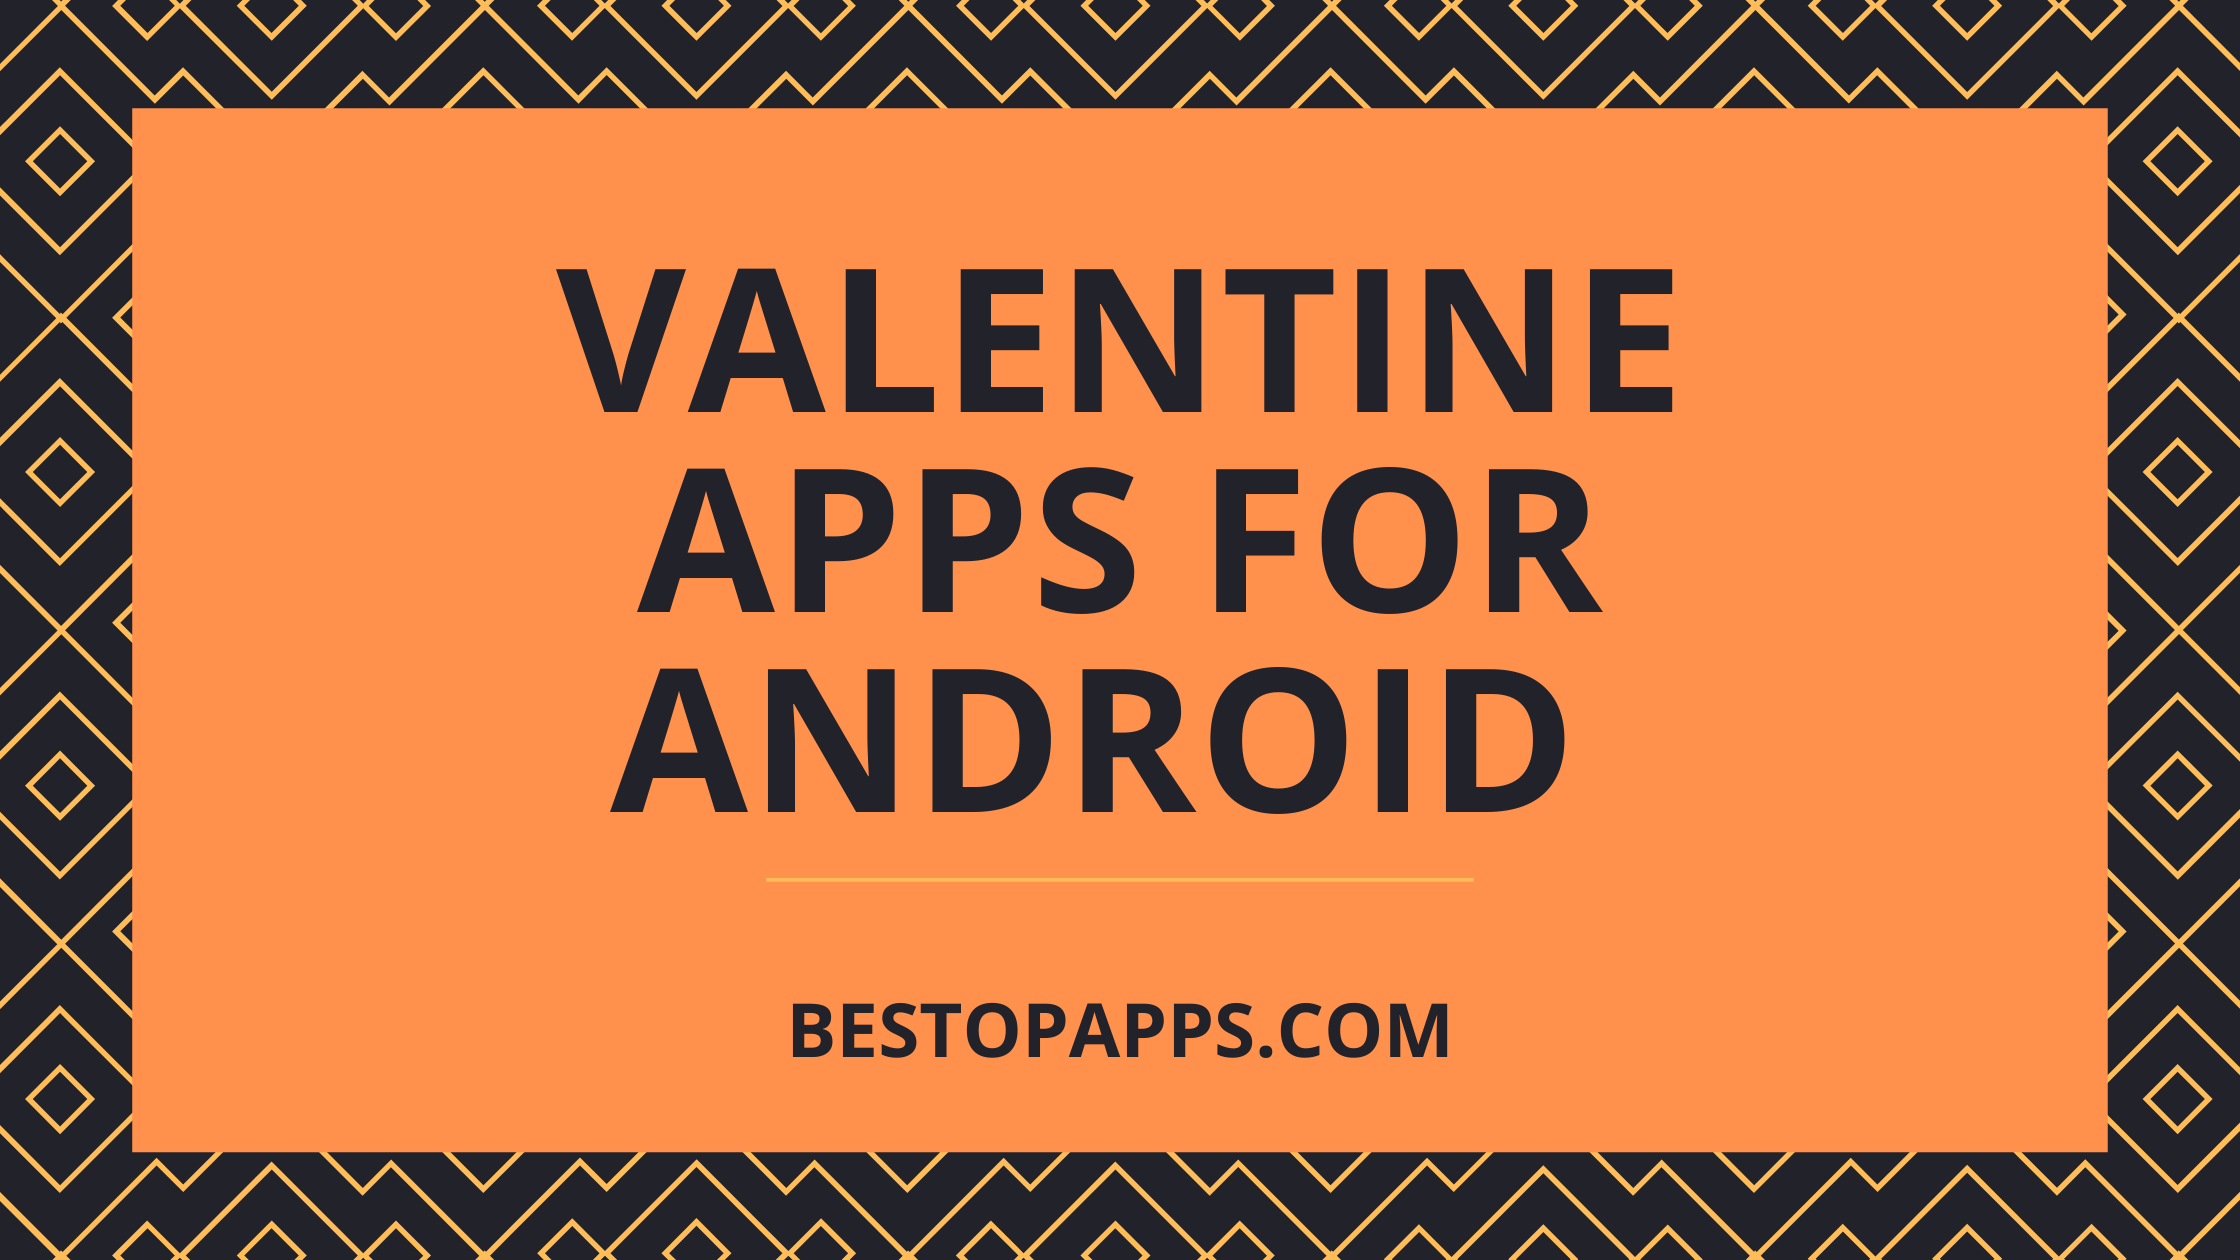 Valentine Apps for Android